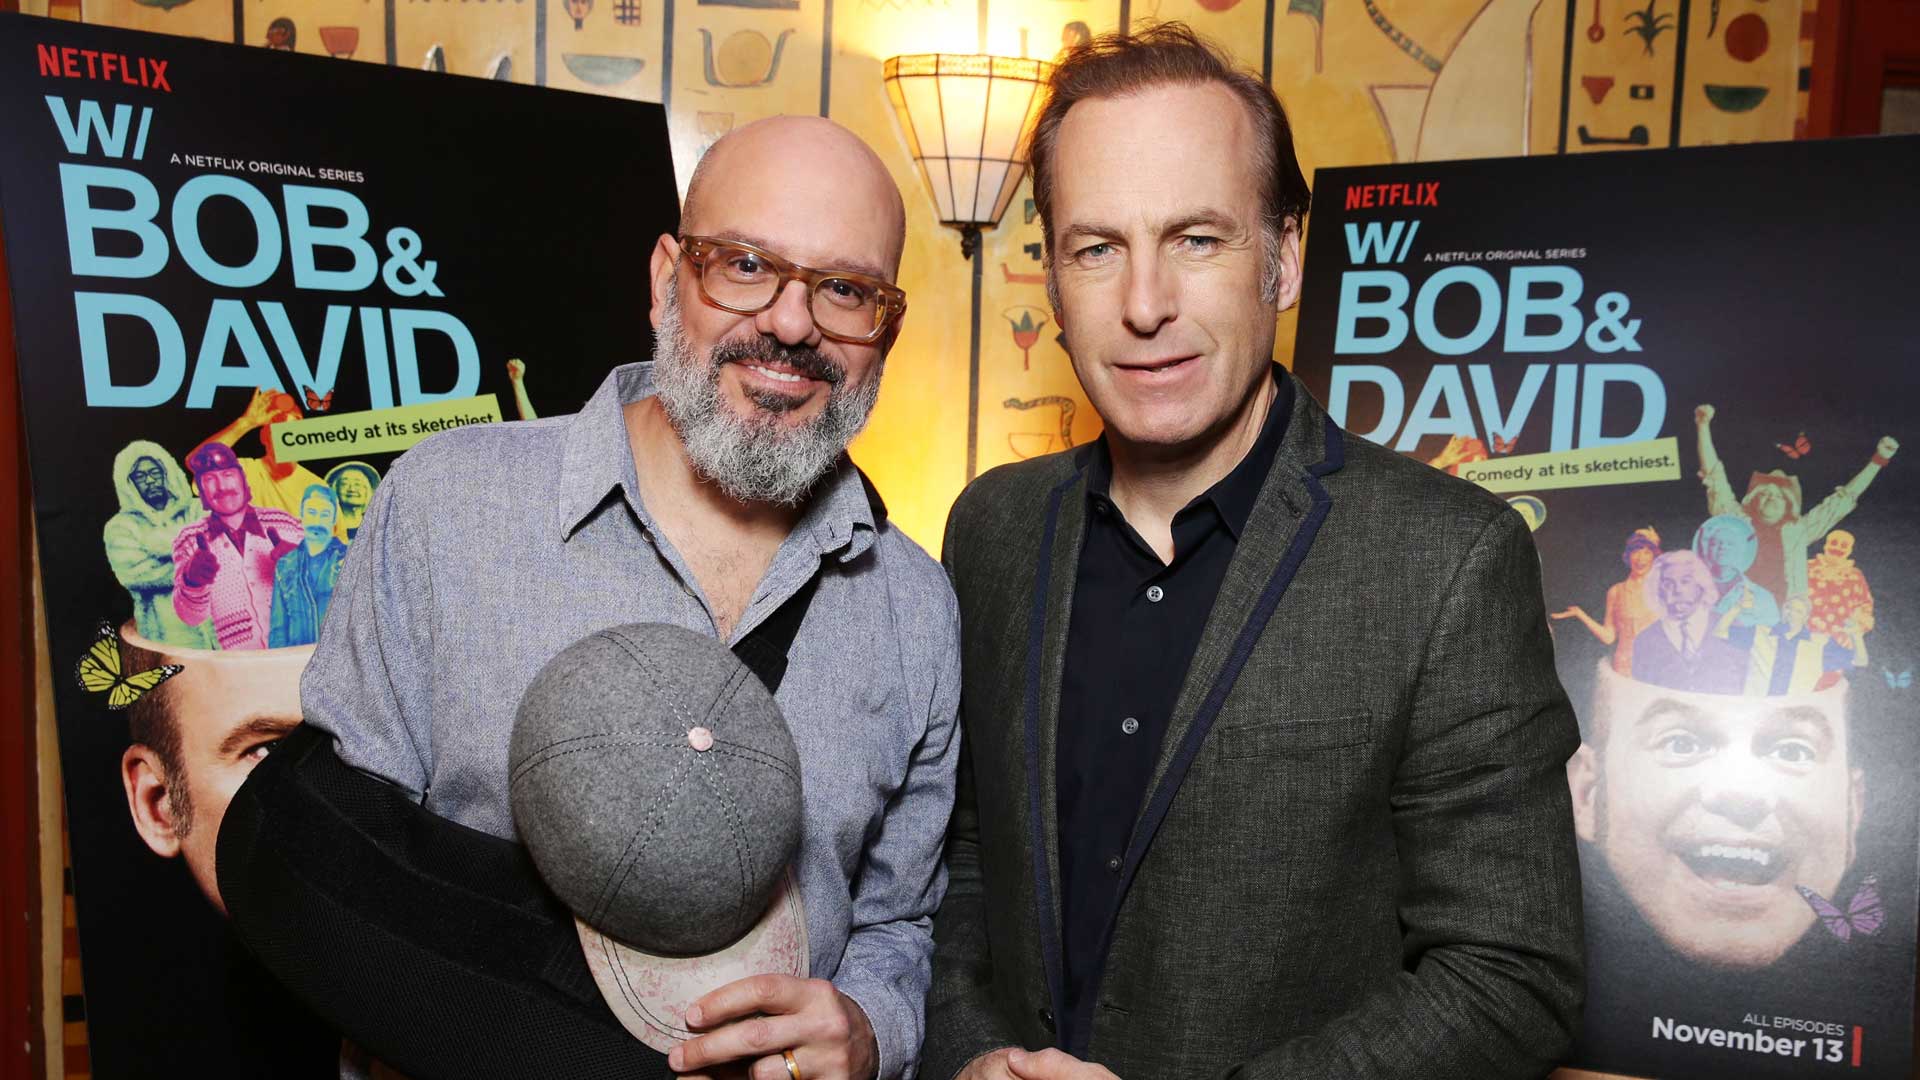 Only Epic TV Binge-Watchers Can Pass This Netflix Quiz — Can You? David Cross Bob Odenkirk W Bob And David Premiere